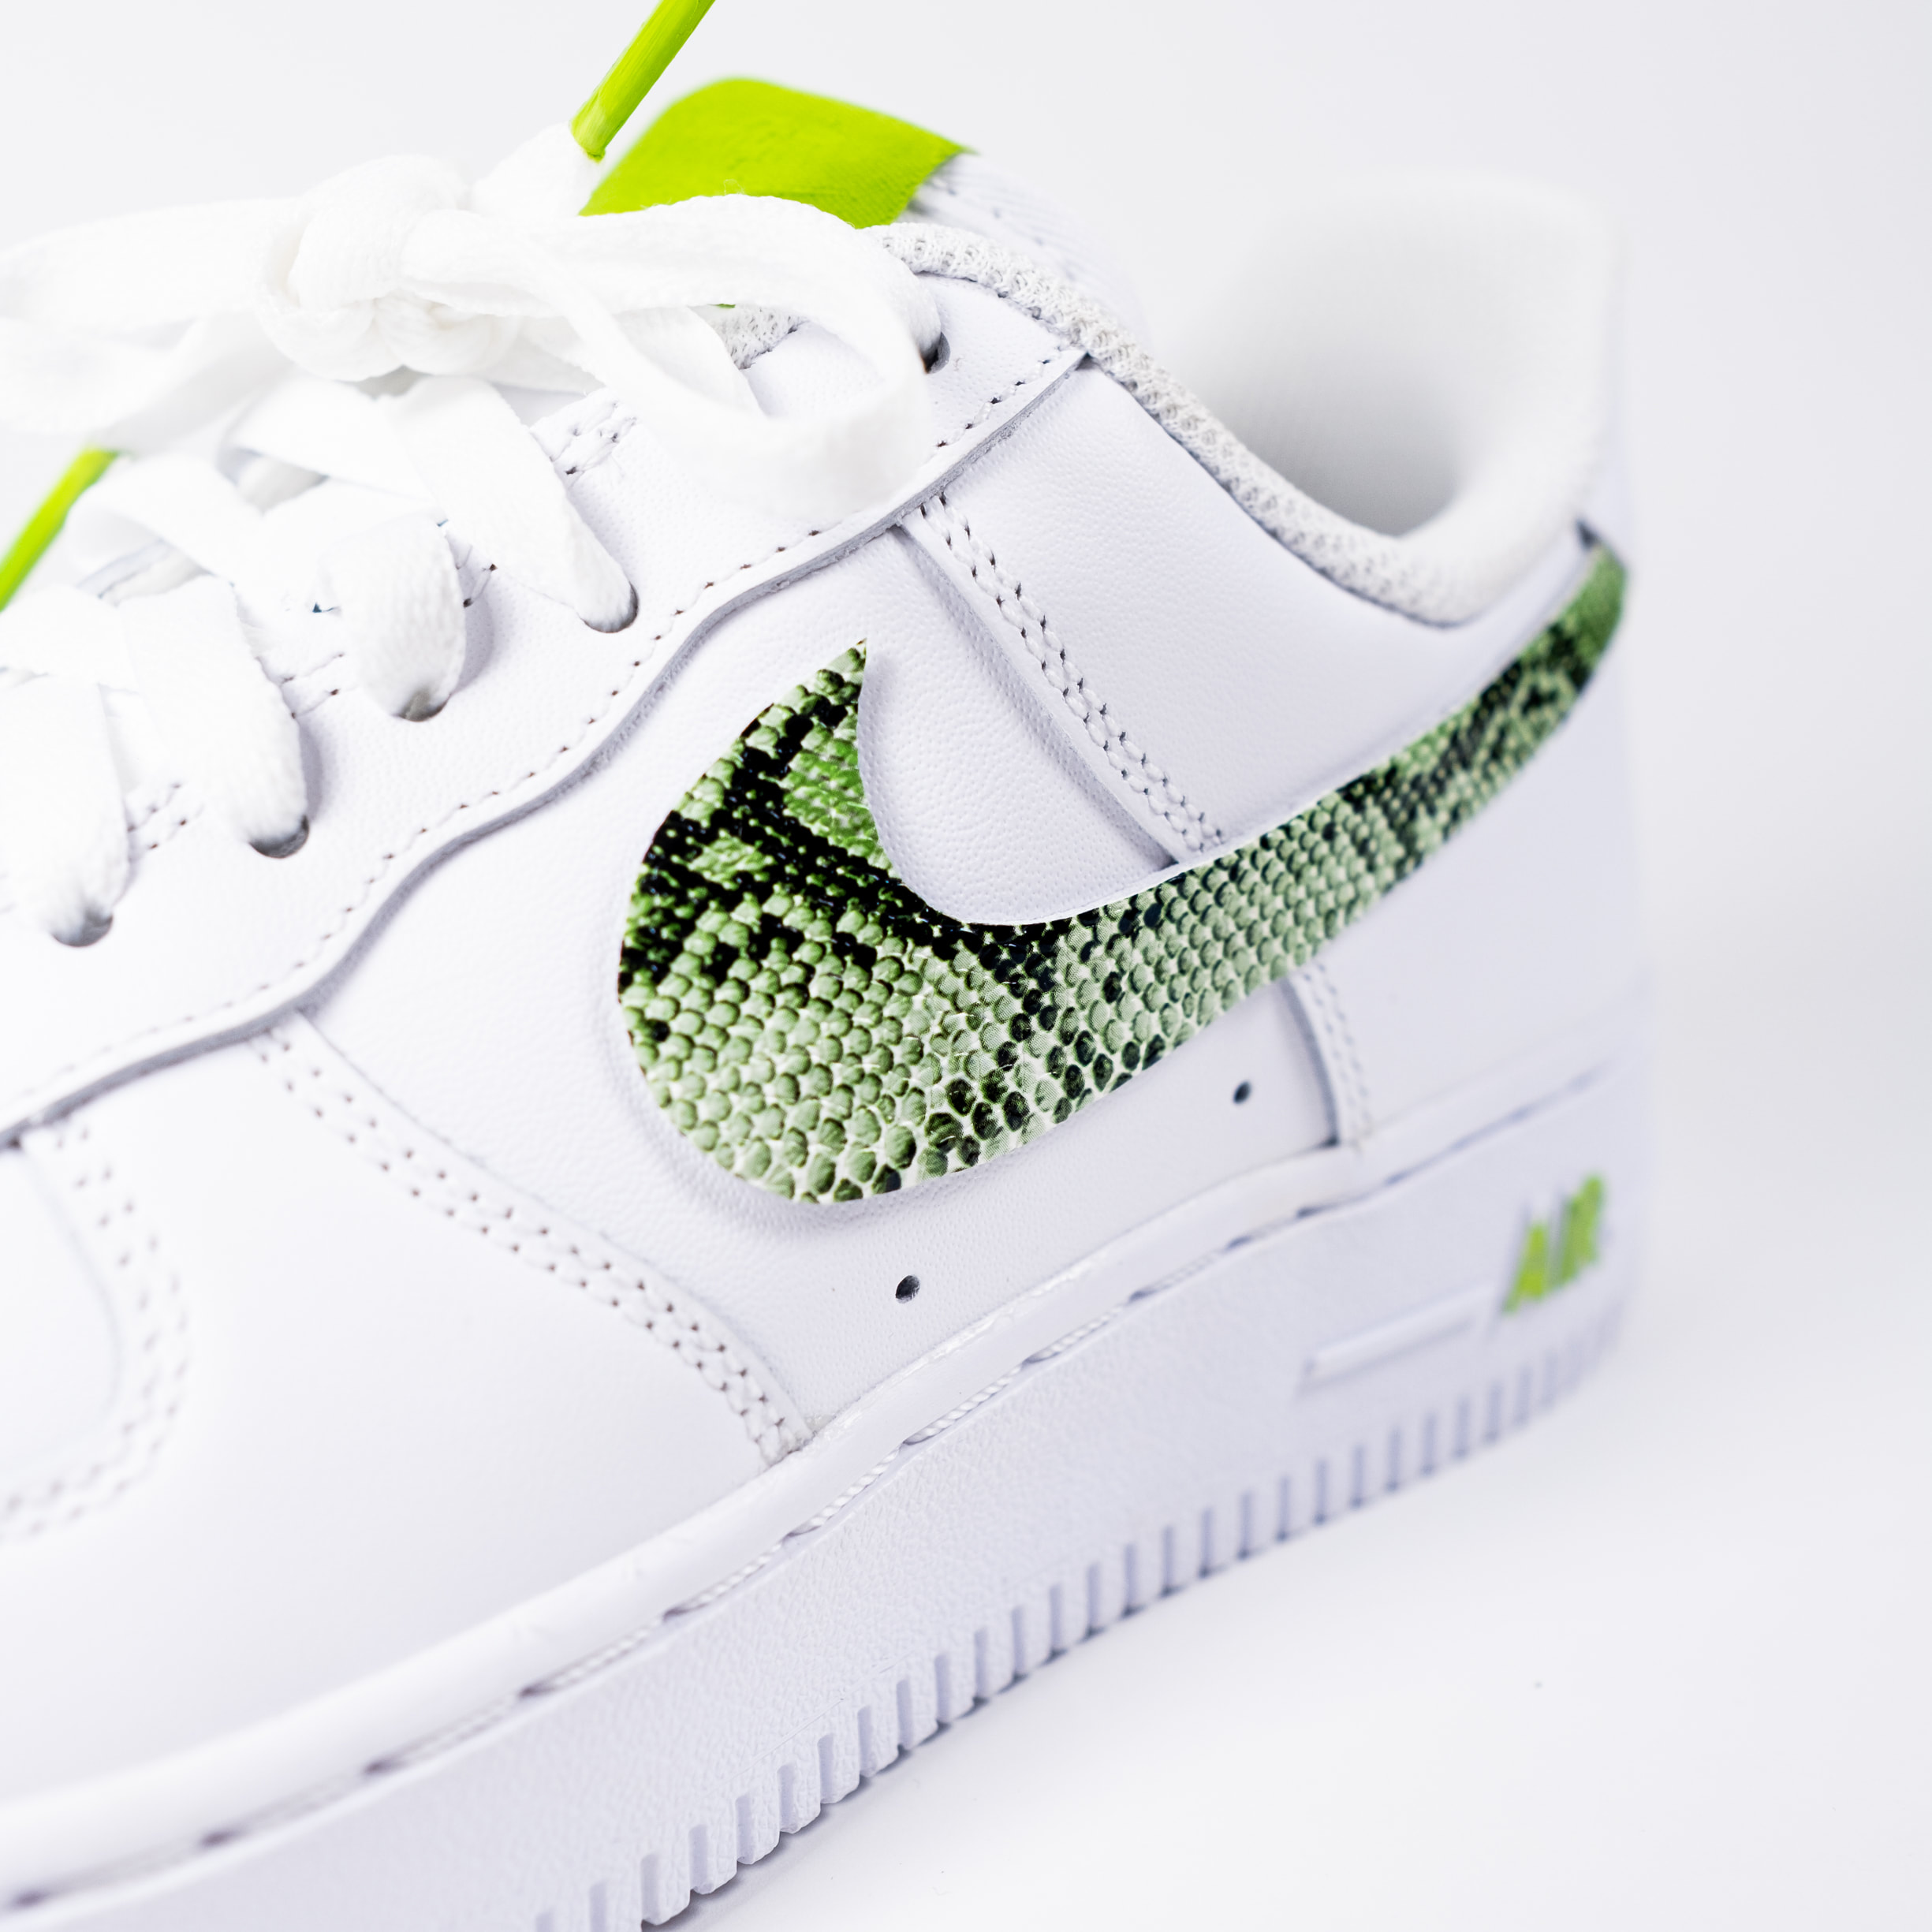 Nike, Shoes, Air Force Neon Green